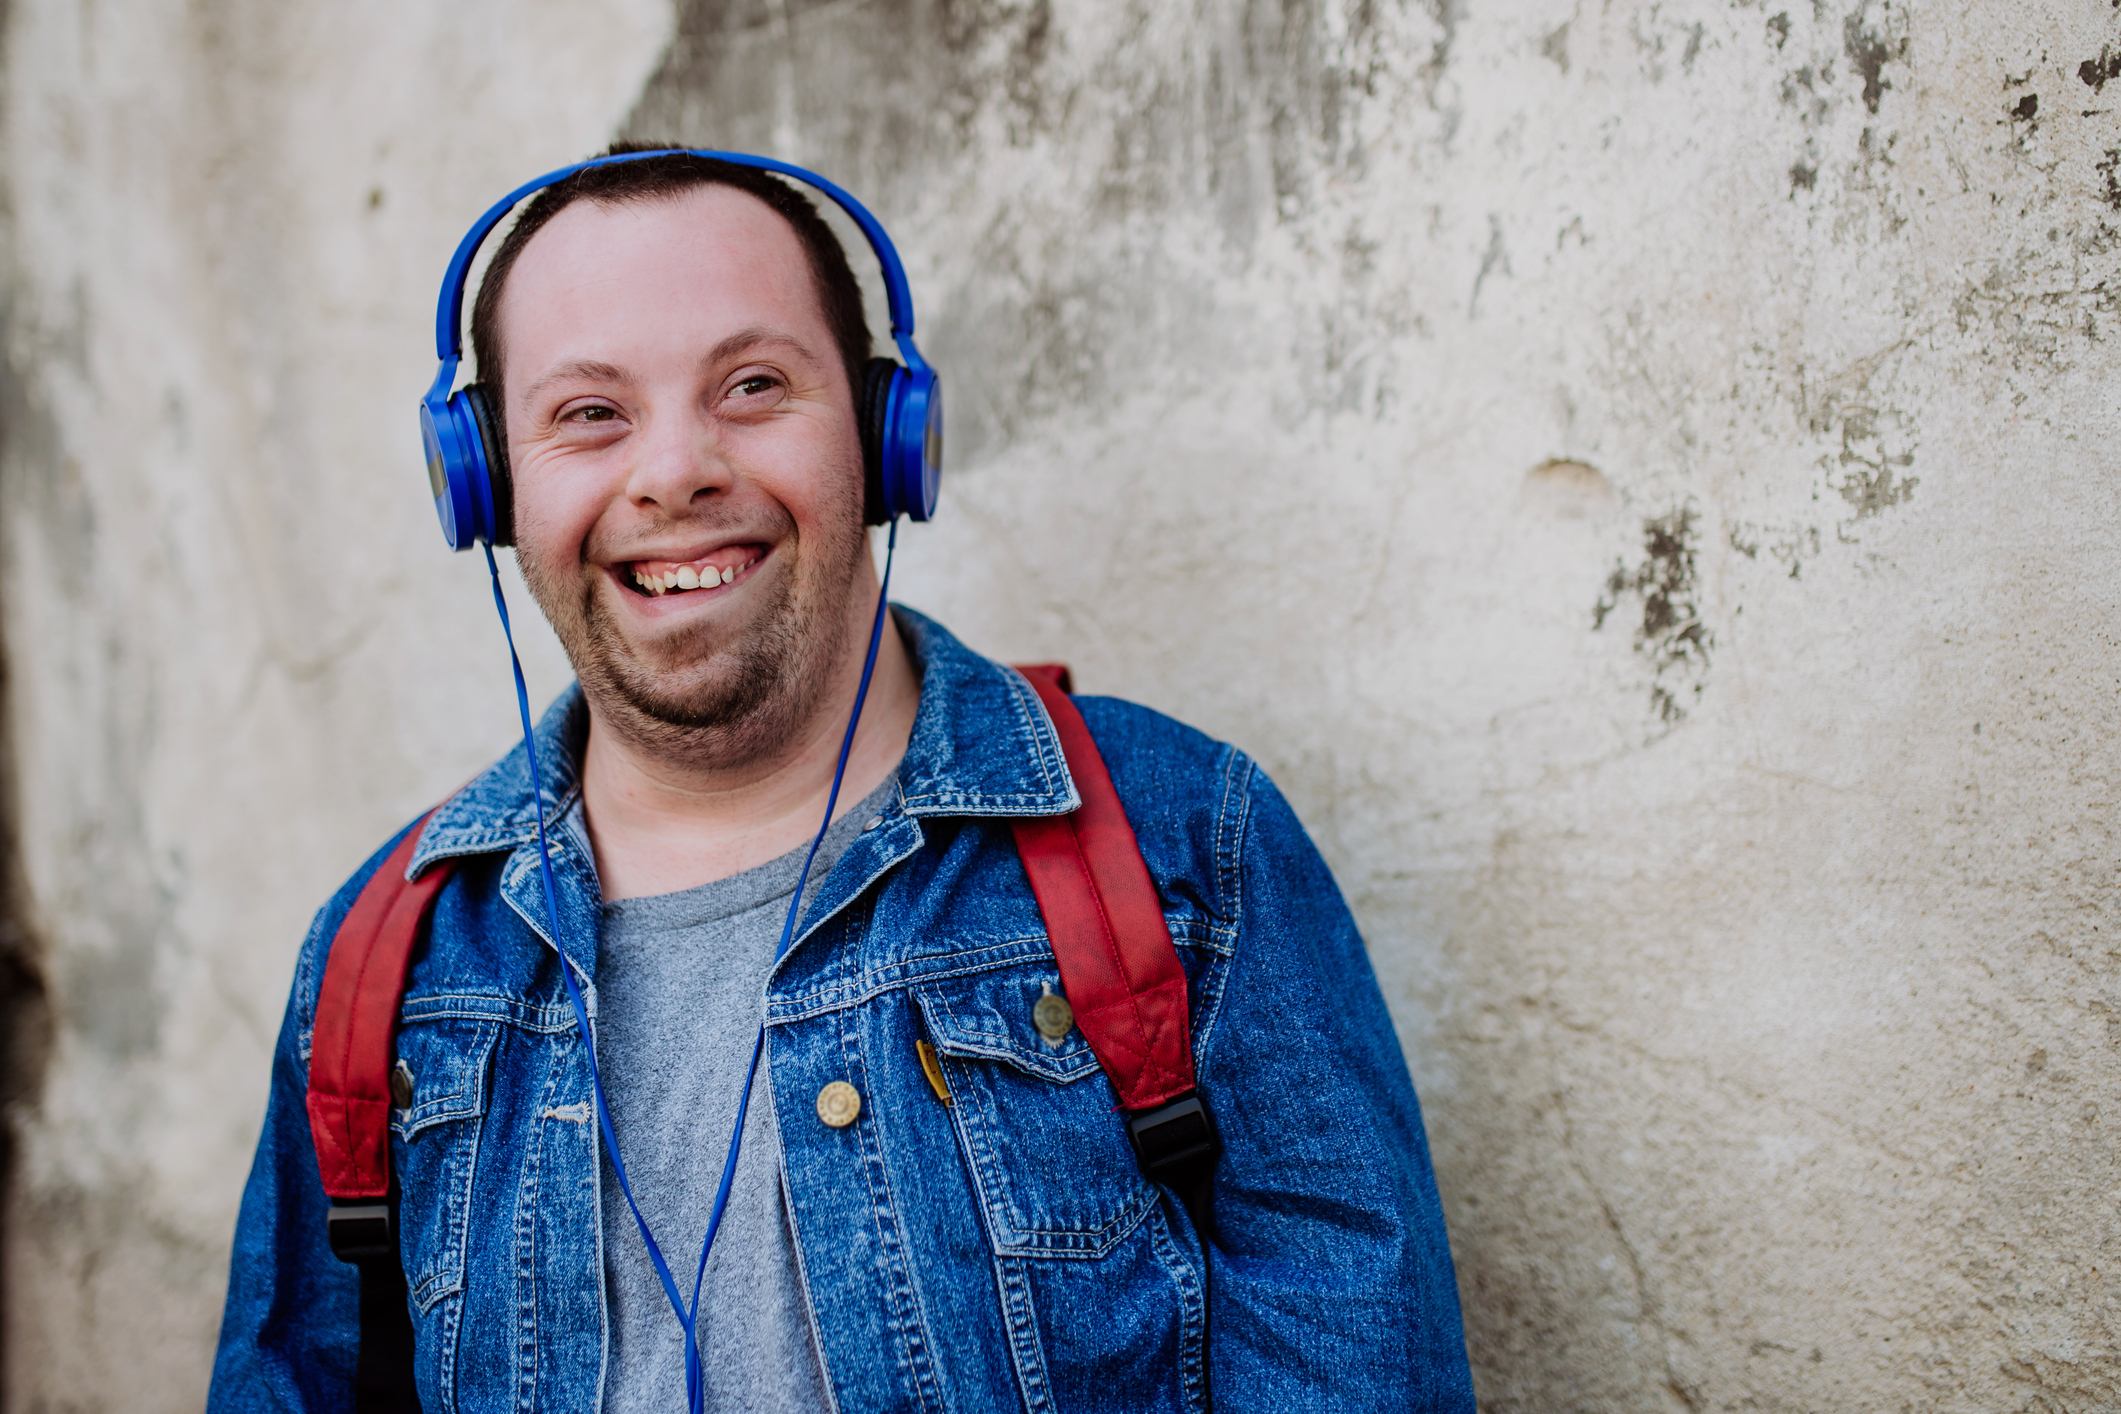 Man with a disability wearing headphones and jeans jacket